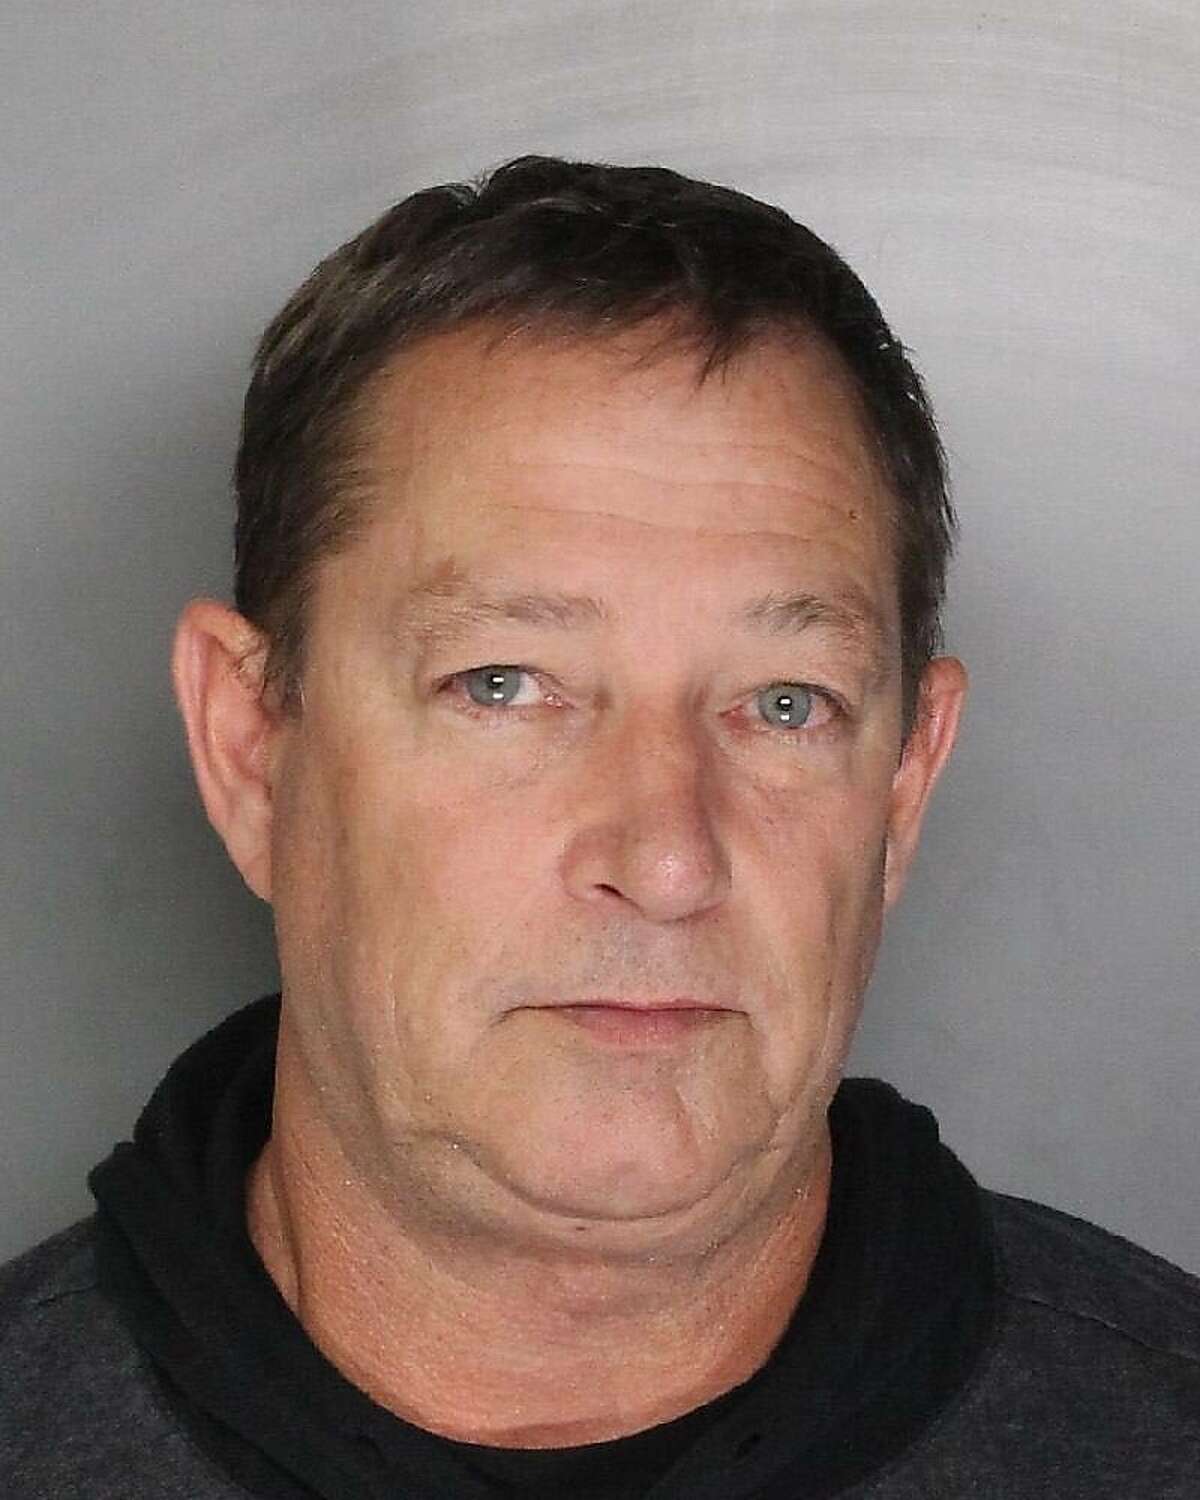 Booking photo of the suspect Roy Charles Waller in the NorCal rapist case.